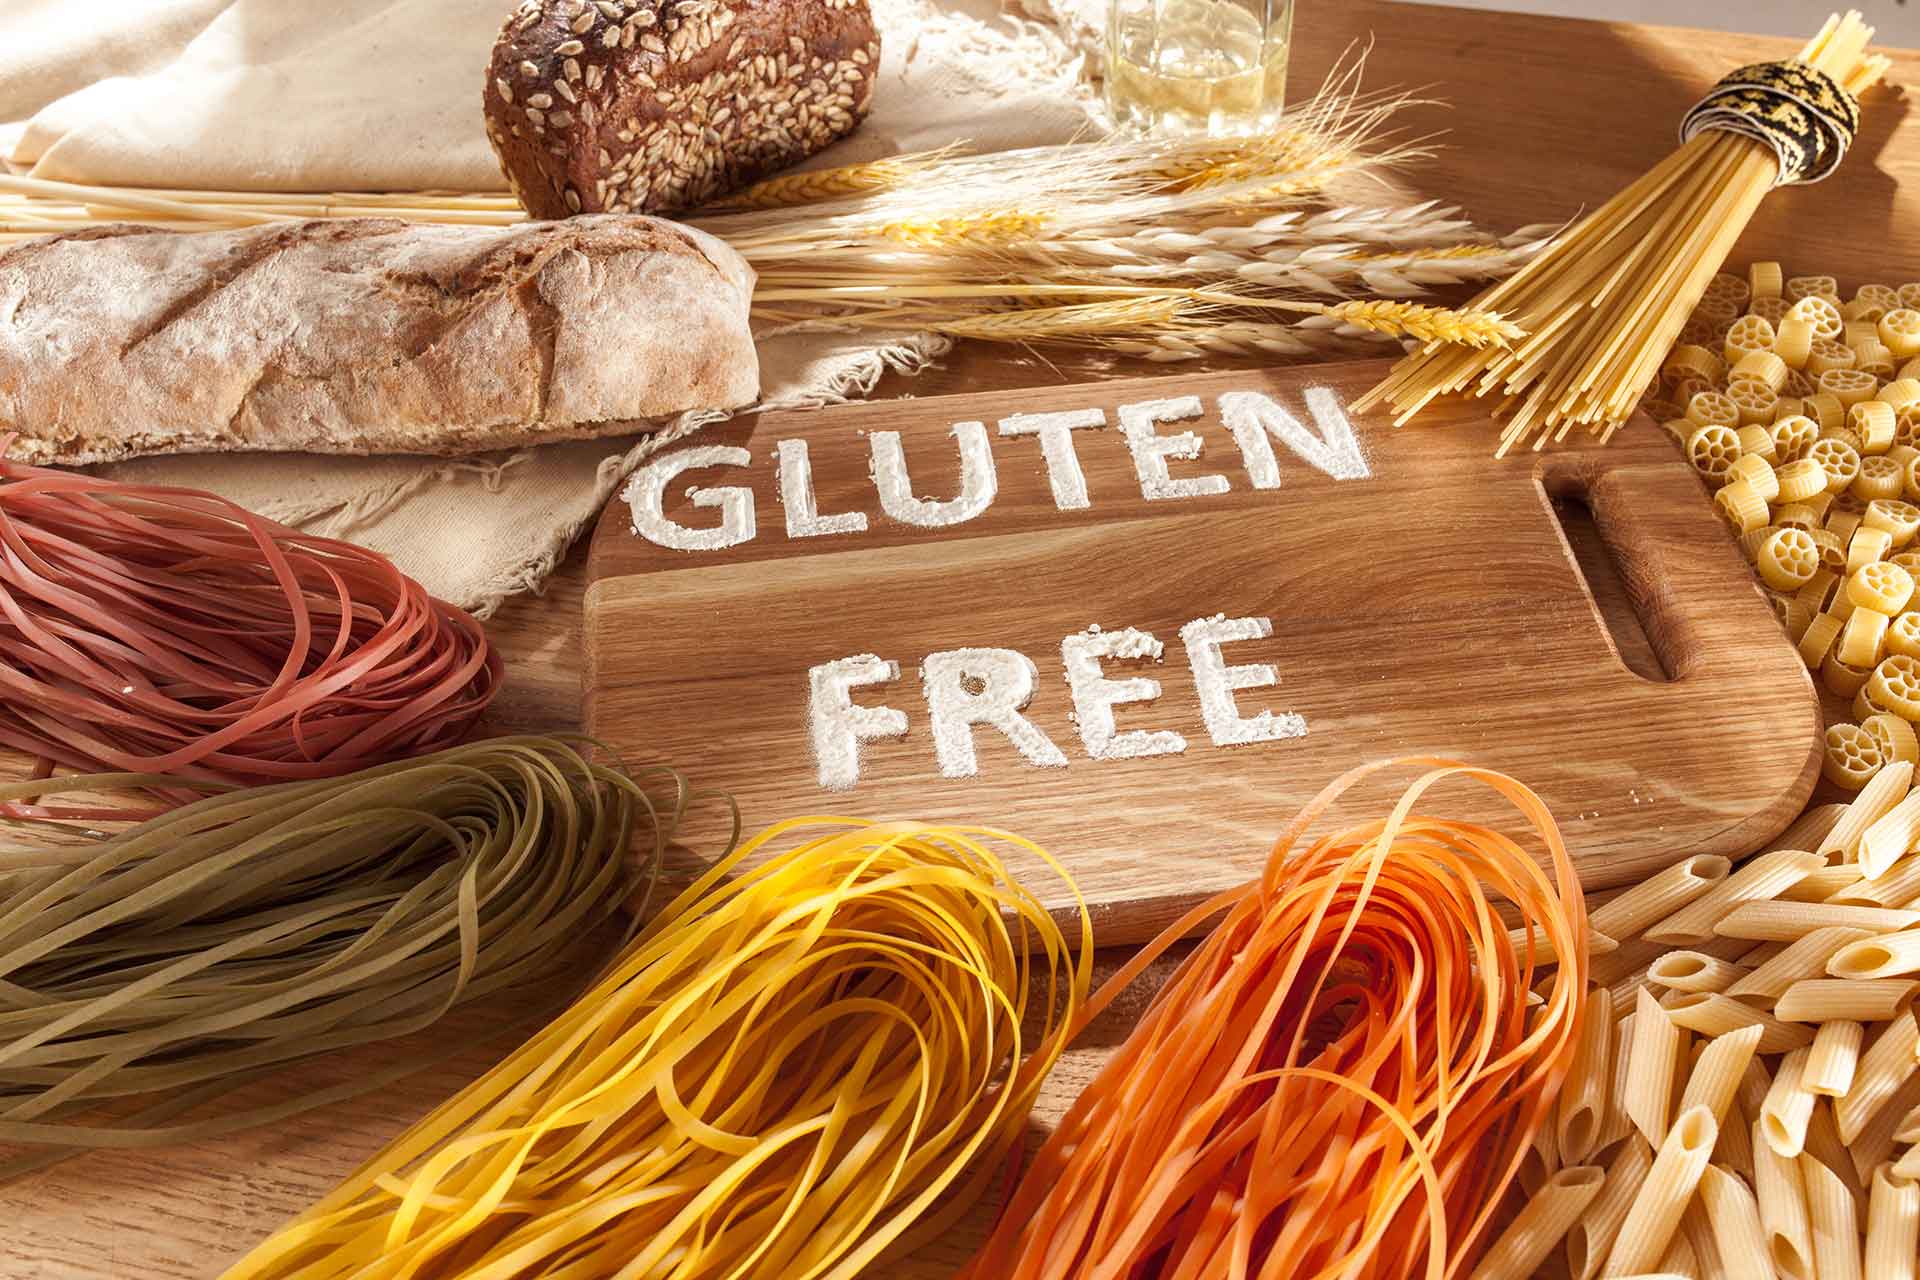 Best Gluten Free Meals for an unforgettable taste and healthy life.